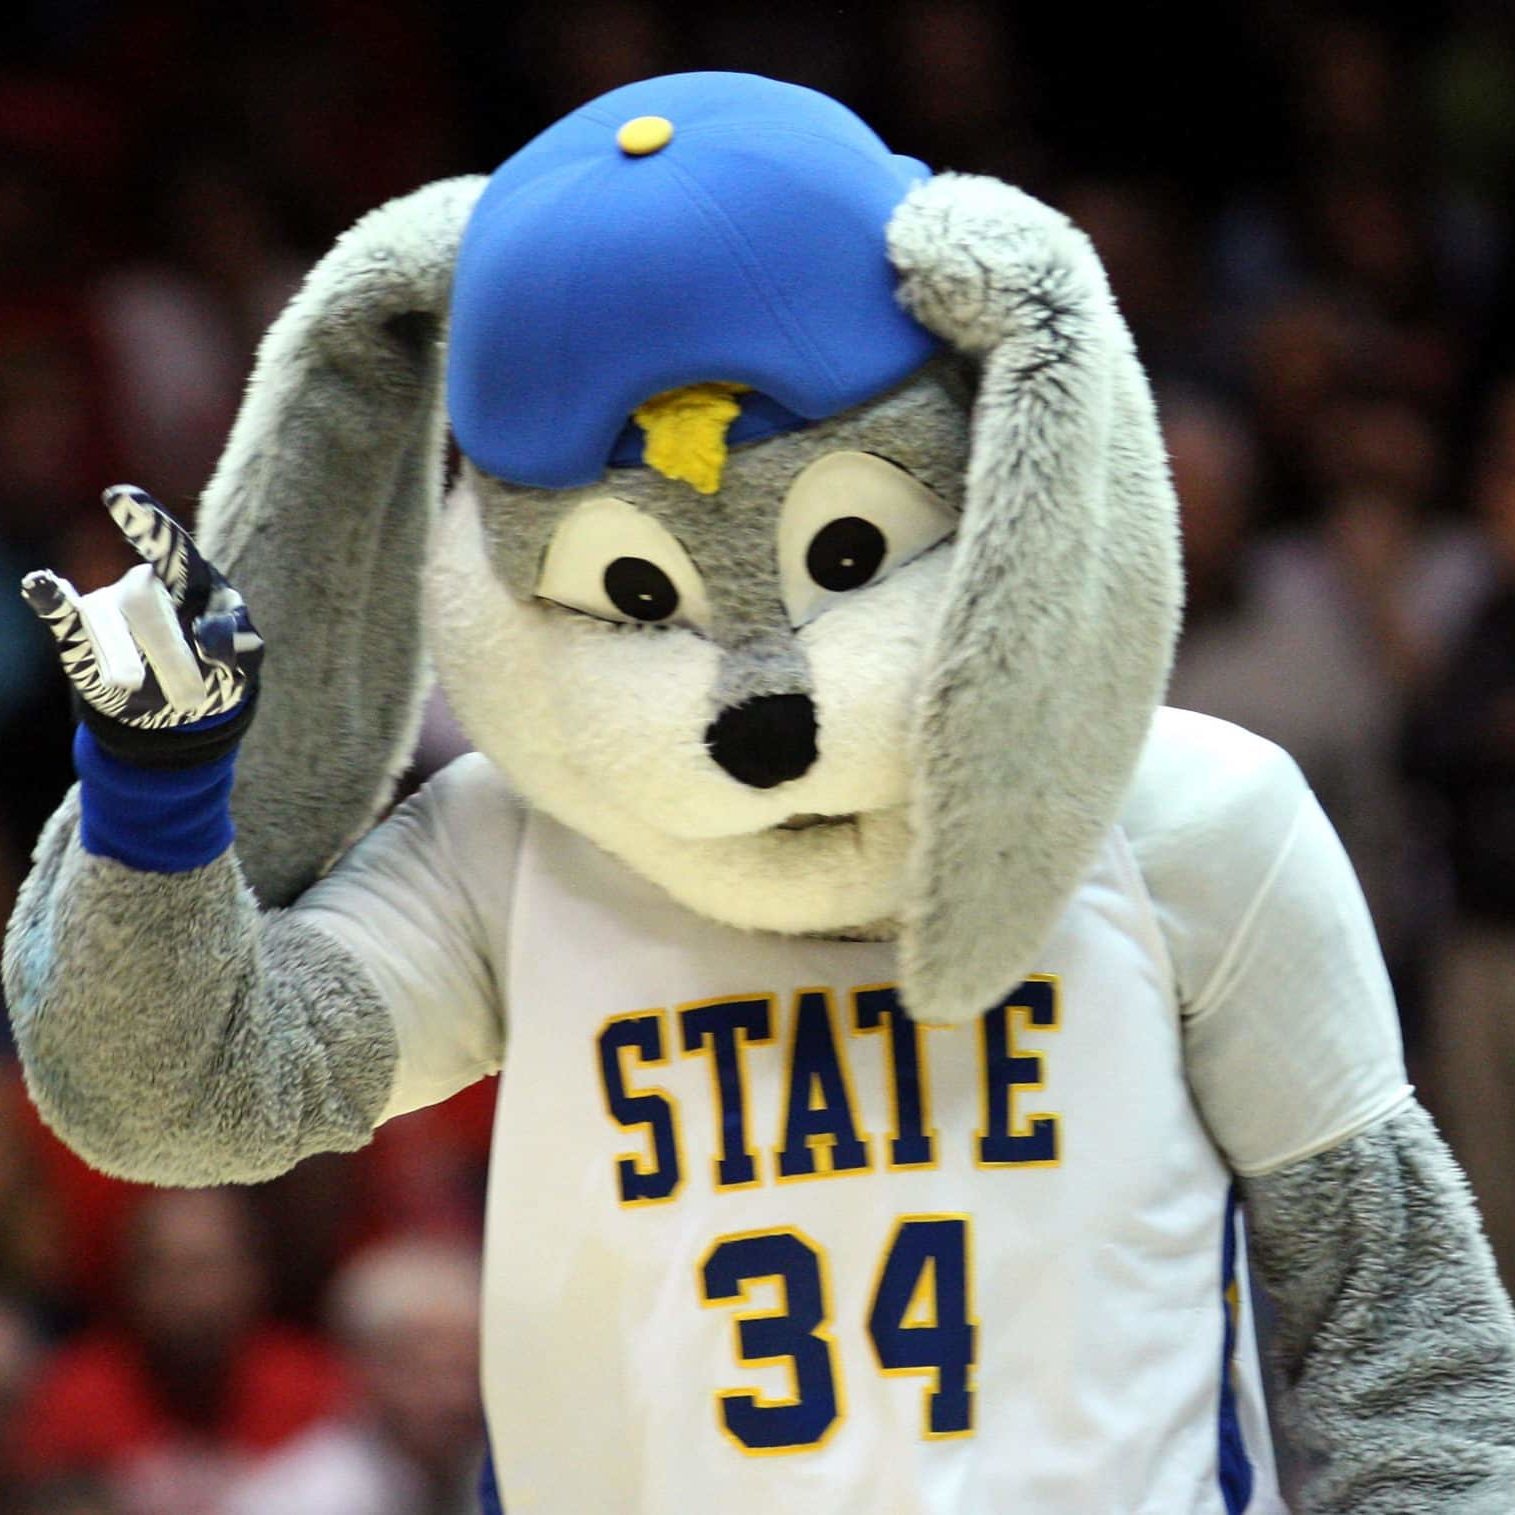 ALBUQUERQUE, NM - MARCH 15: The South Dakota State Jackrabbits mascot walks on the court against the Baylor Bears during the second round of the 2012 NCAA Men's Basketball Tournament at The Pit on March 15, 2012 in Albuquerque, New Mexico.  (Photo by Ronald Martinez/Getty Images)